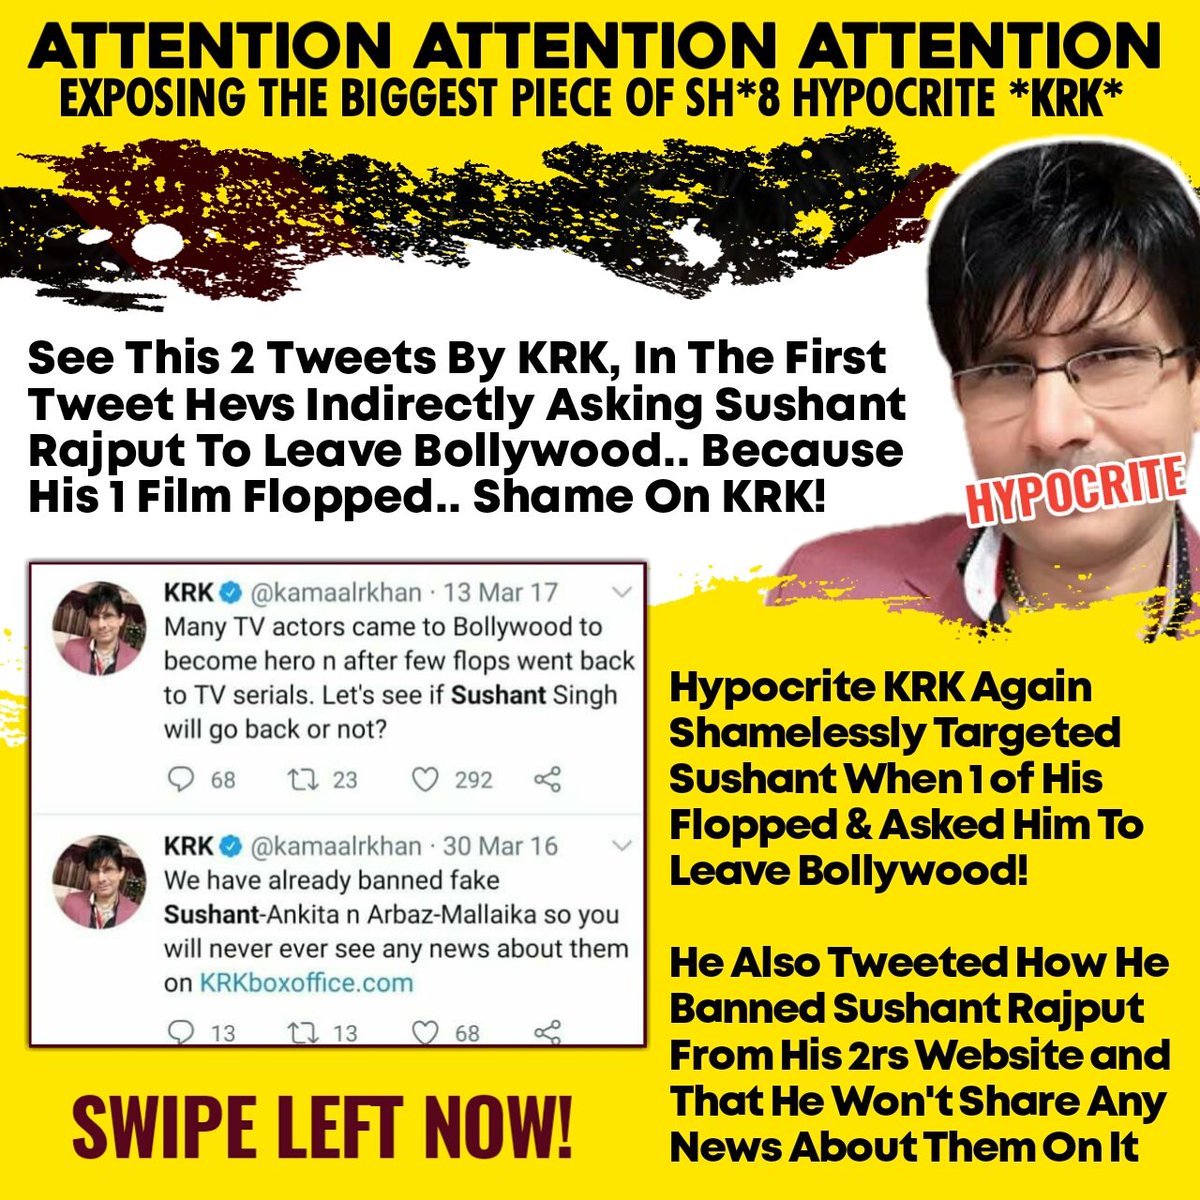 EXPOSING KRK- 5In These Both Tweets In This Pic, This Shameless Man  @kamaalrkhan is Indirectly Asking Sushant Rajput To Leave B'wood, Why? Bcoz His 1 Film Flopped, Seriously By This Logic KRK Should Leave Earth Bcoz His Film Was Biggest Disaster! #FakeKRKRealCulpritOfSushant